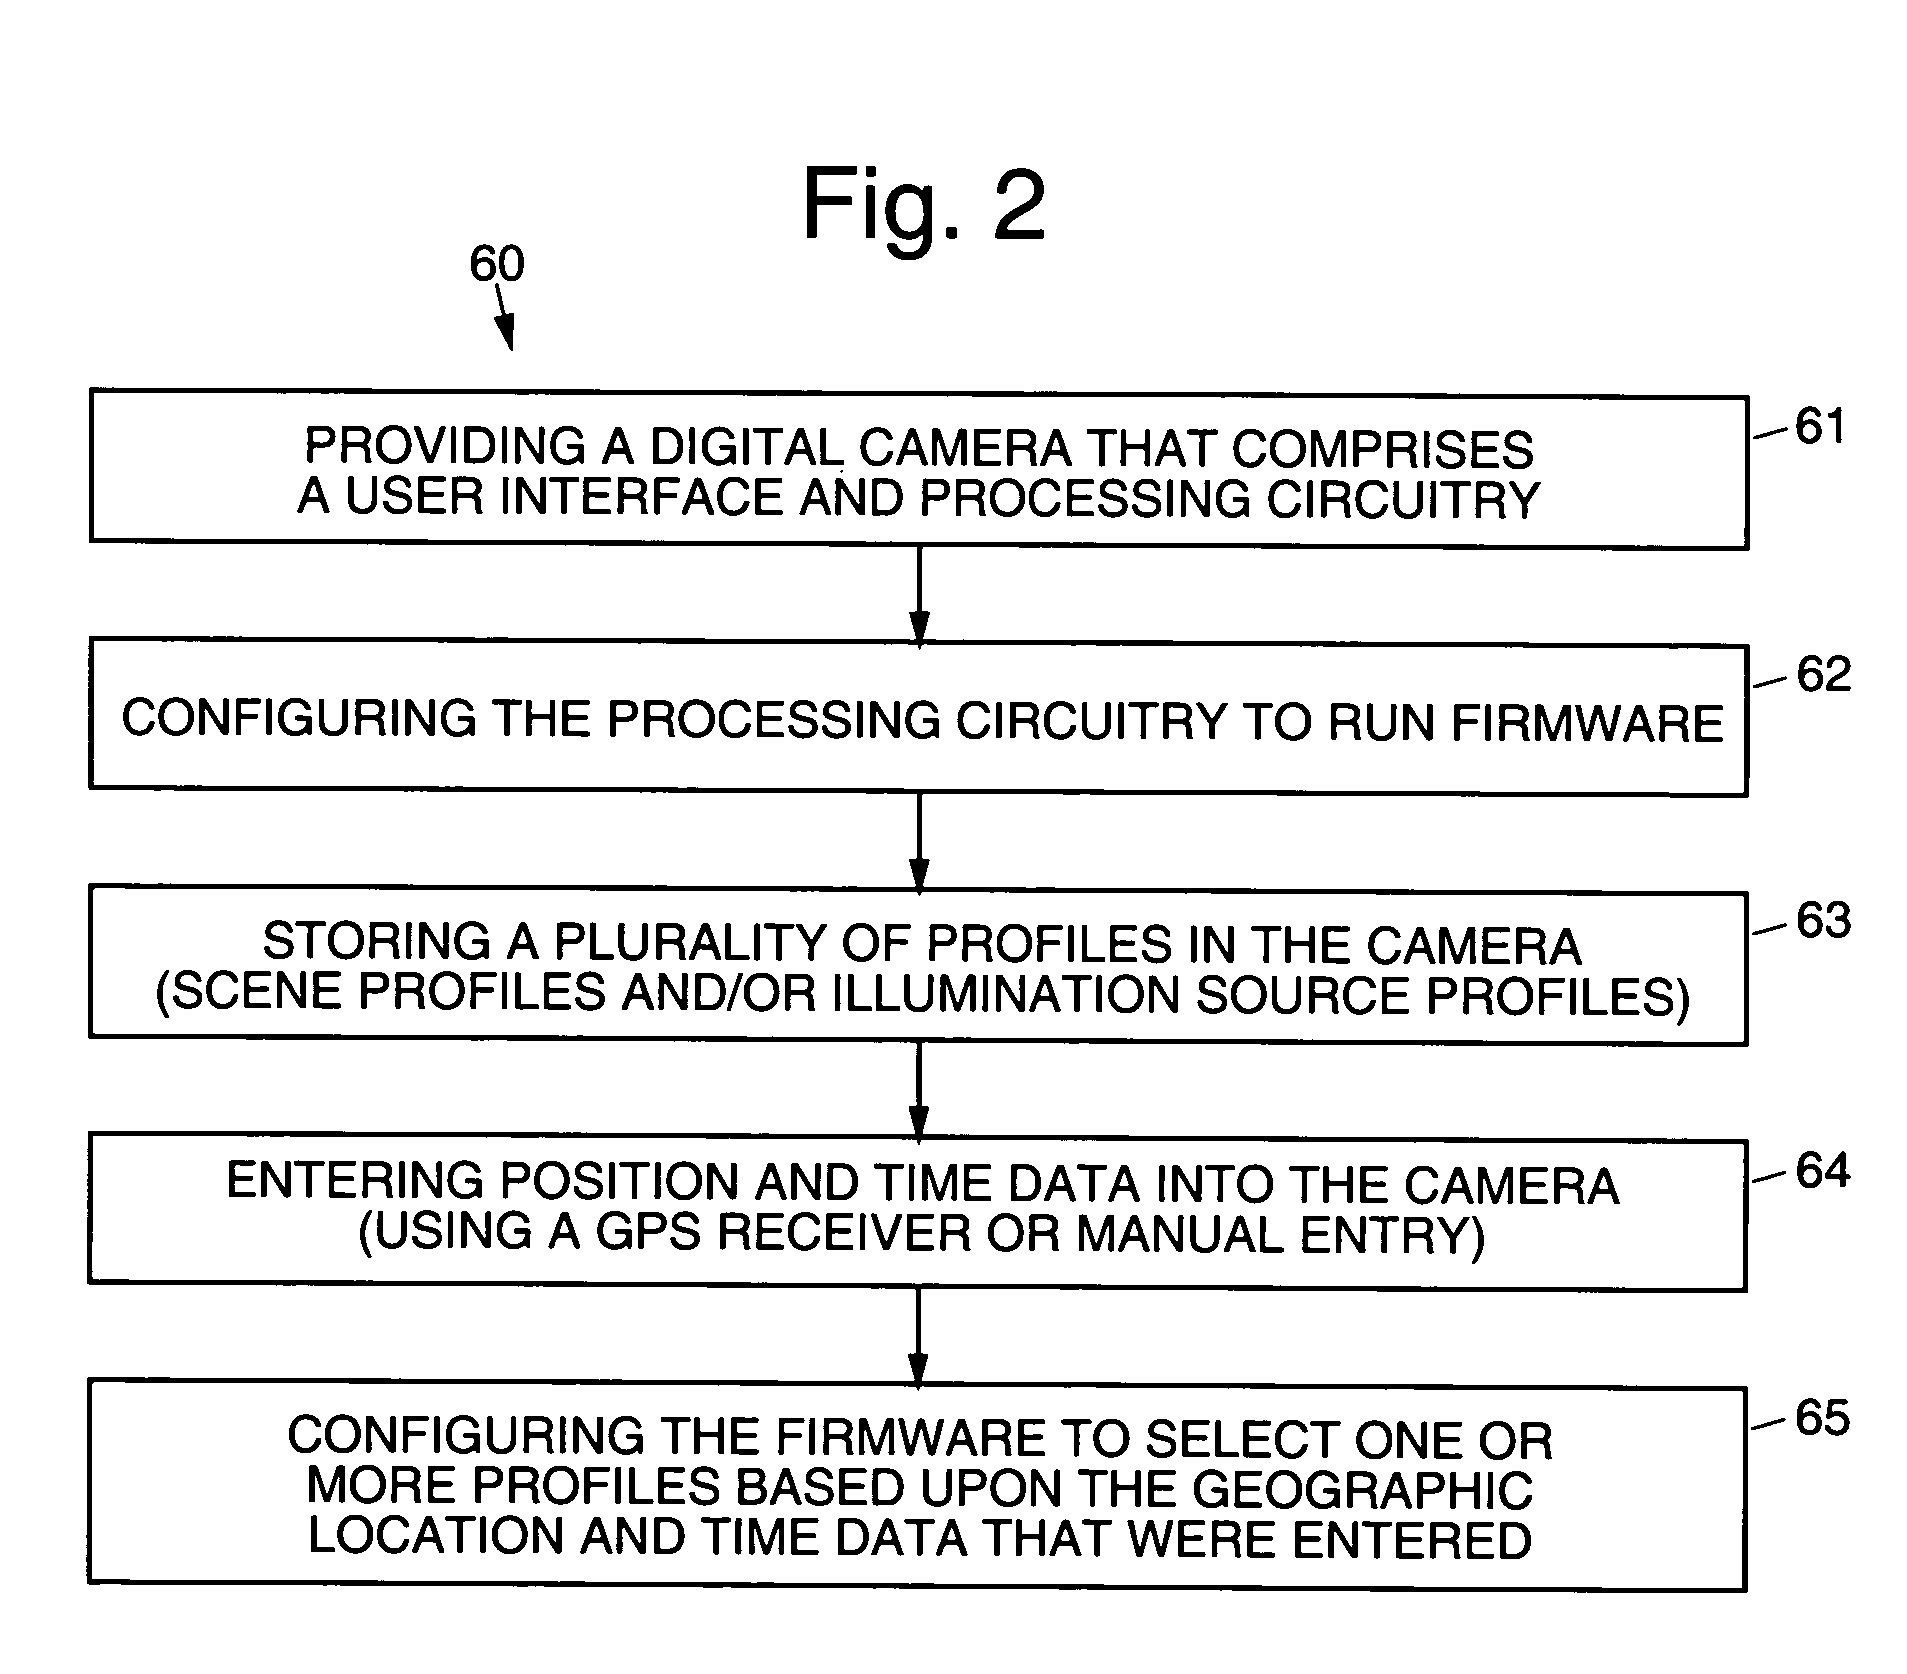 Digital cameras and methods using GPS/time-based and/or location data to provide scene selection, and dynamic illumination and exposure adjustment